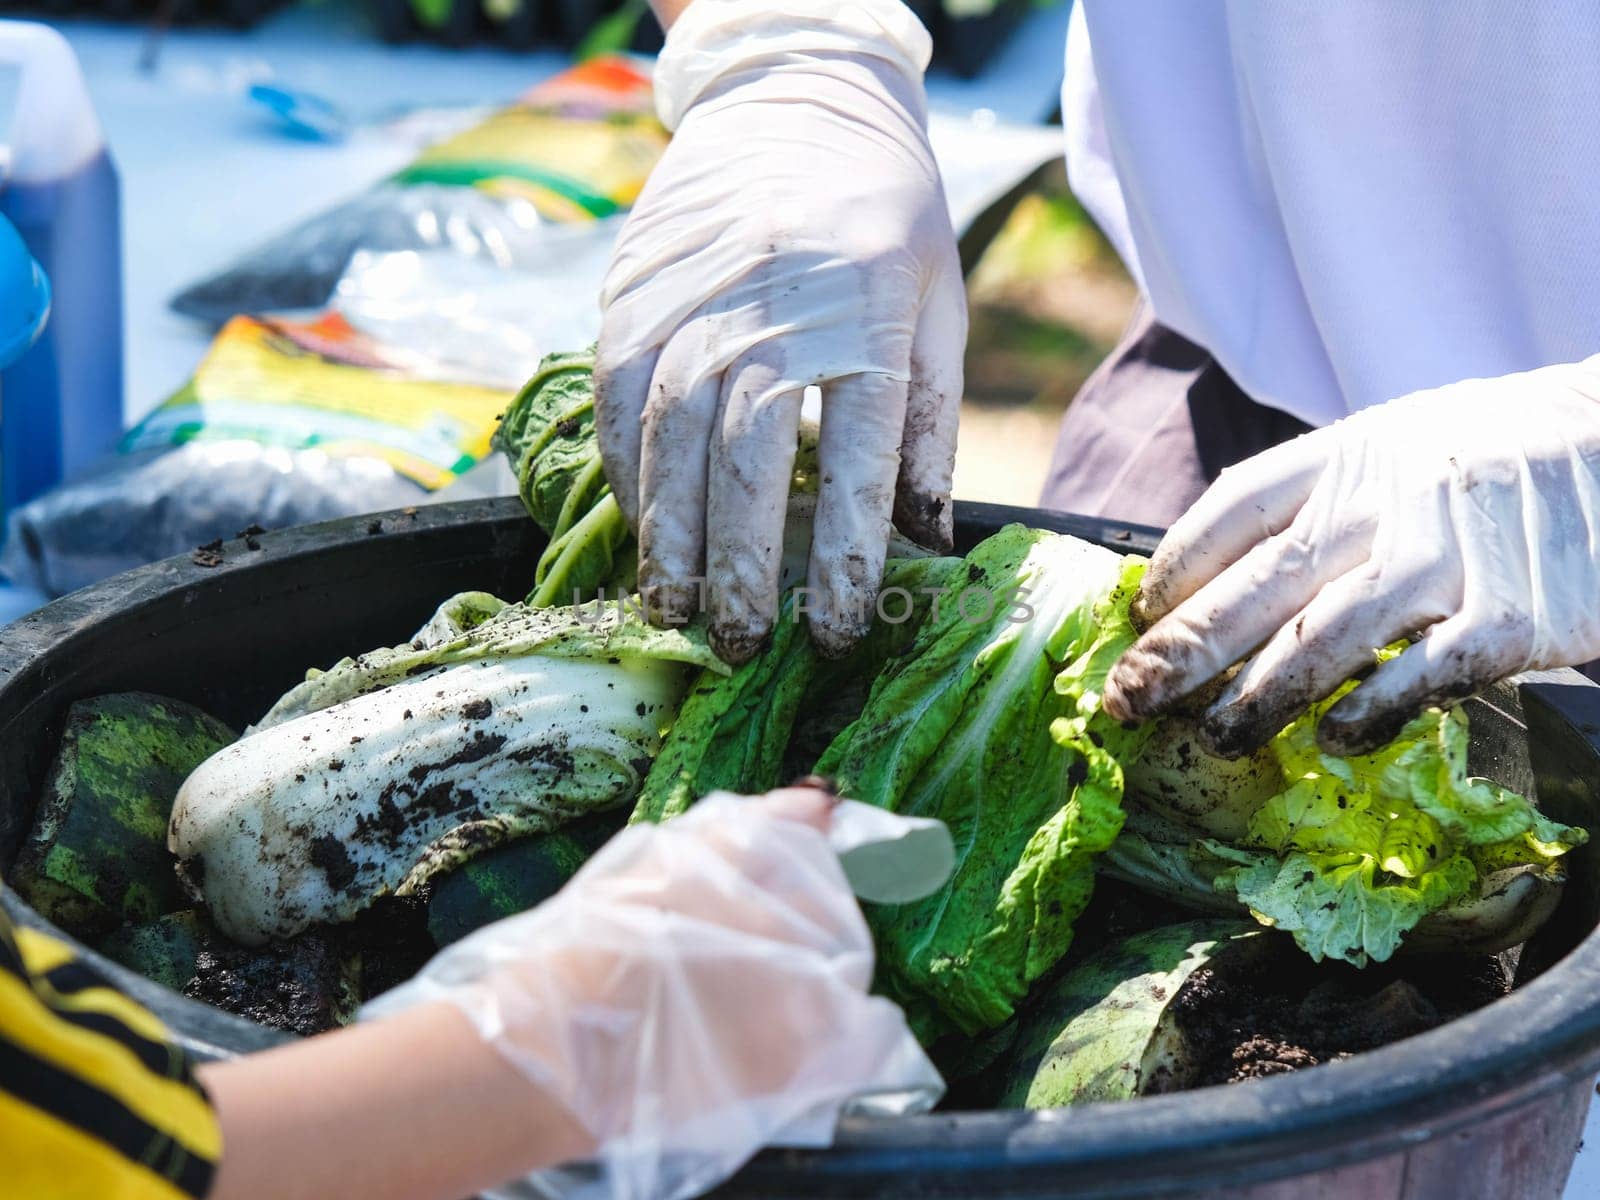 Close-up of children's hands and teacher having fun learning how to raise earthworms. Hands in gloves touches a worm bin with food scraps and lettuce in a container for composting red vermicompost (Eisenia fetida). by TEERASAK